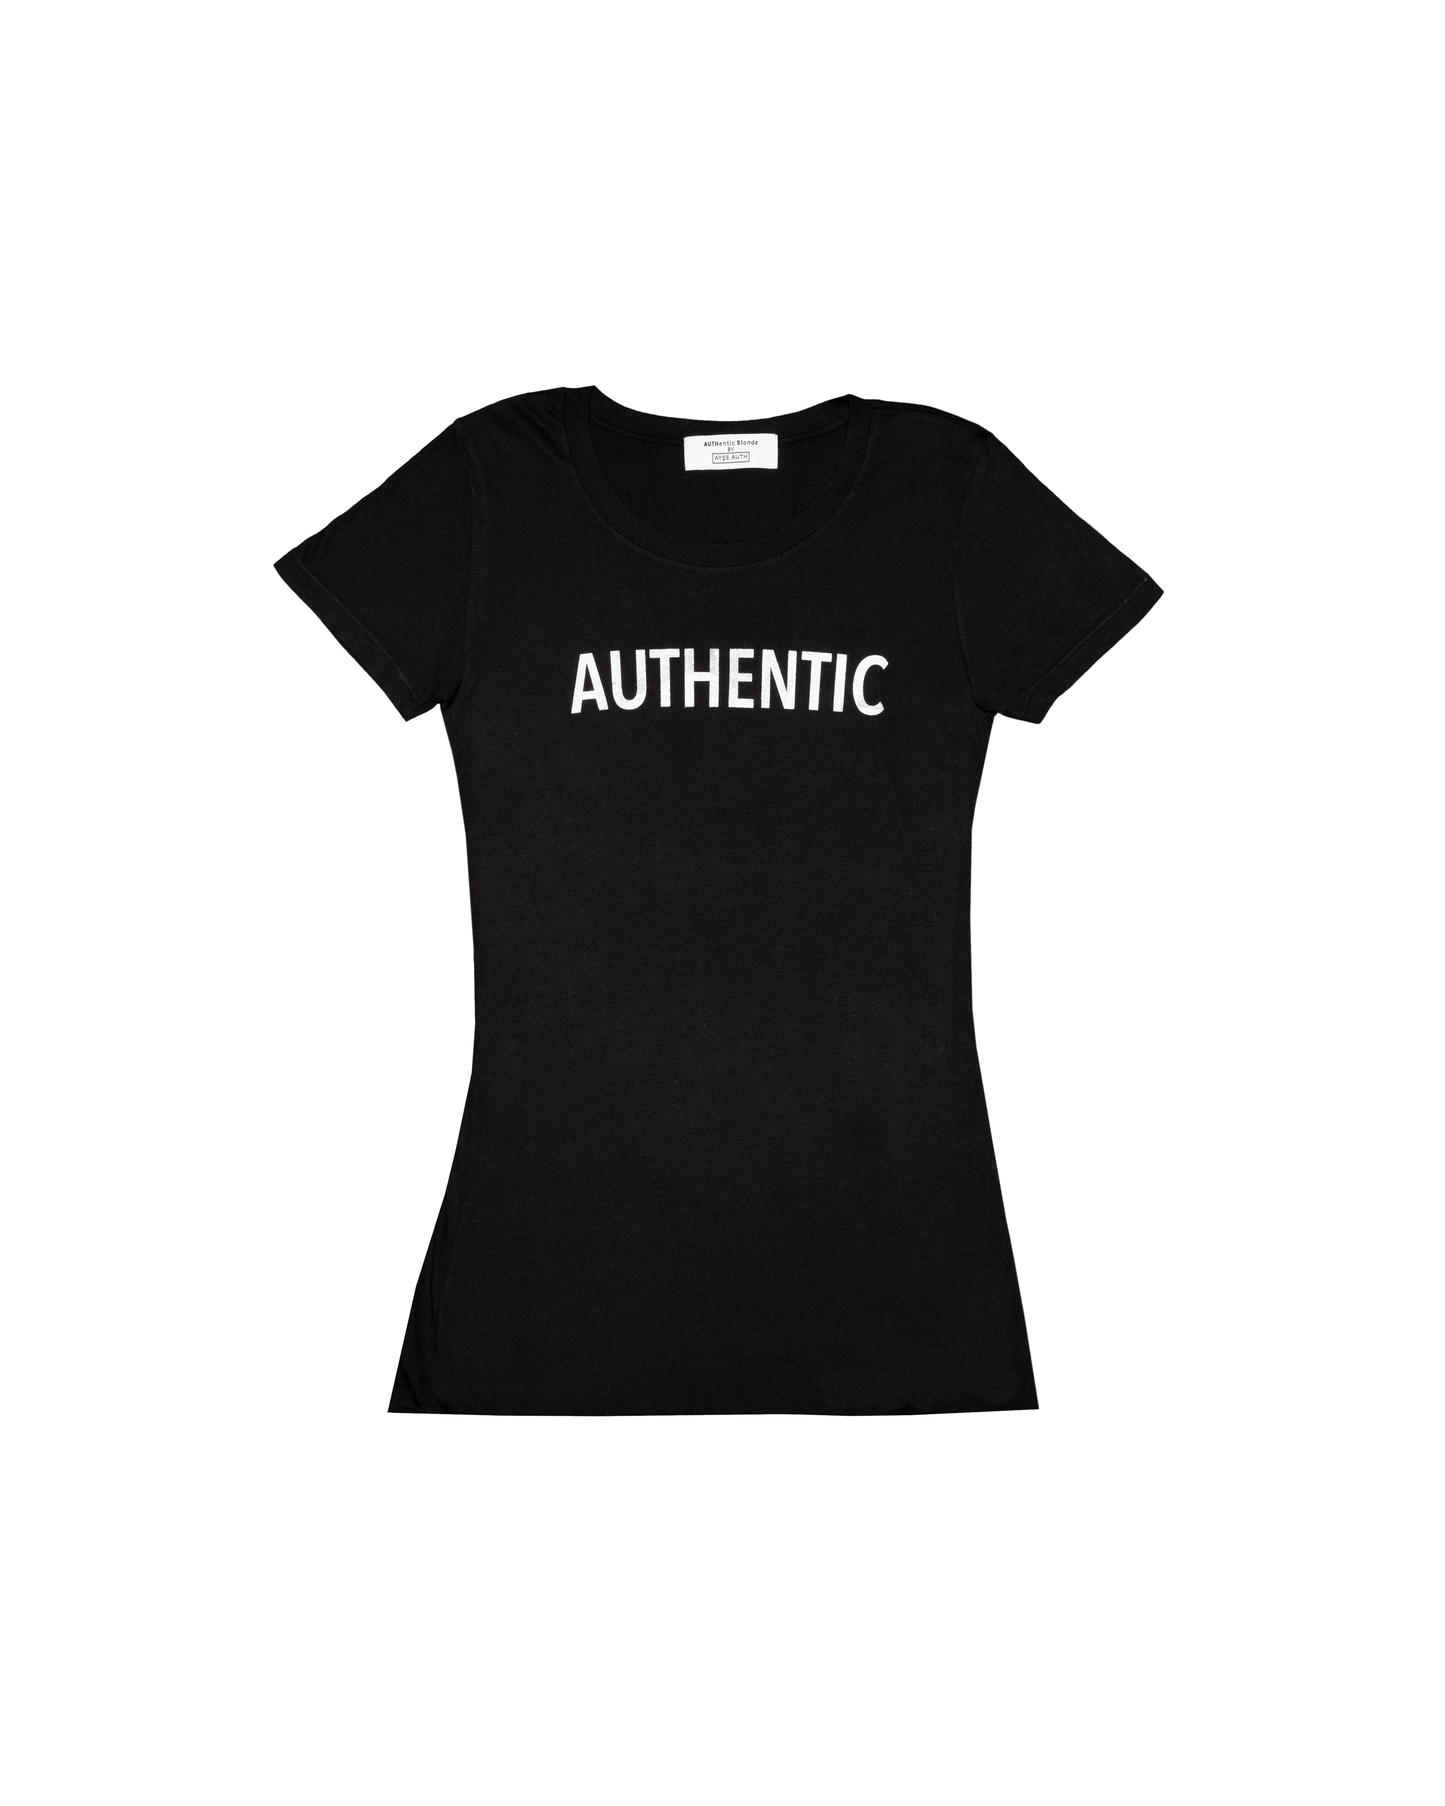 AUTHENTIC T-SHIRTS